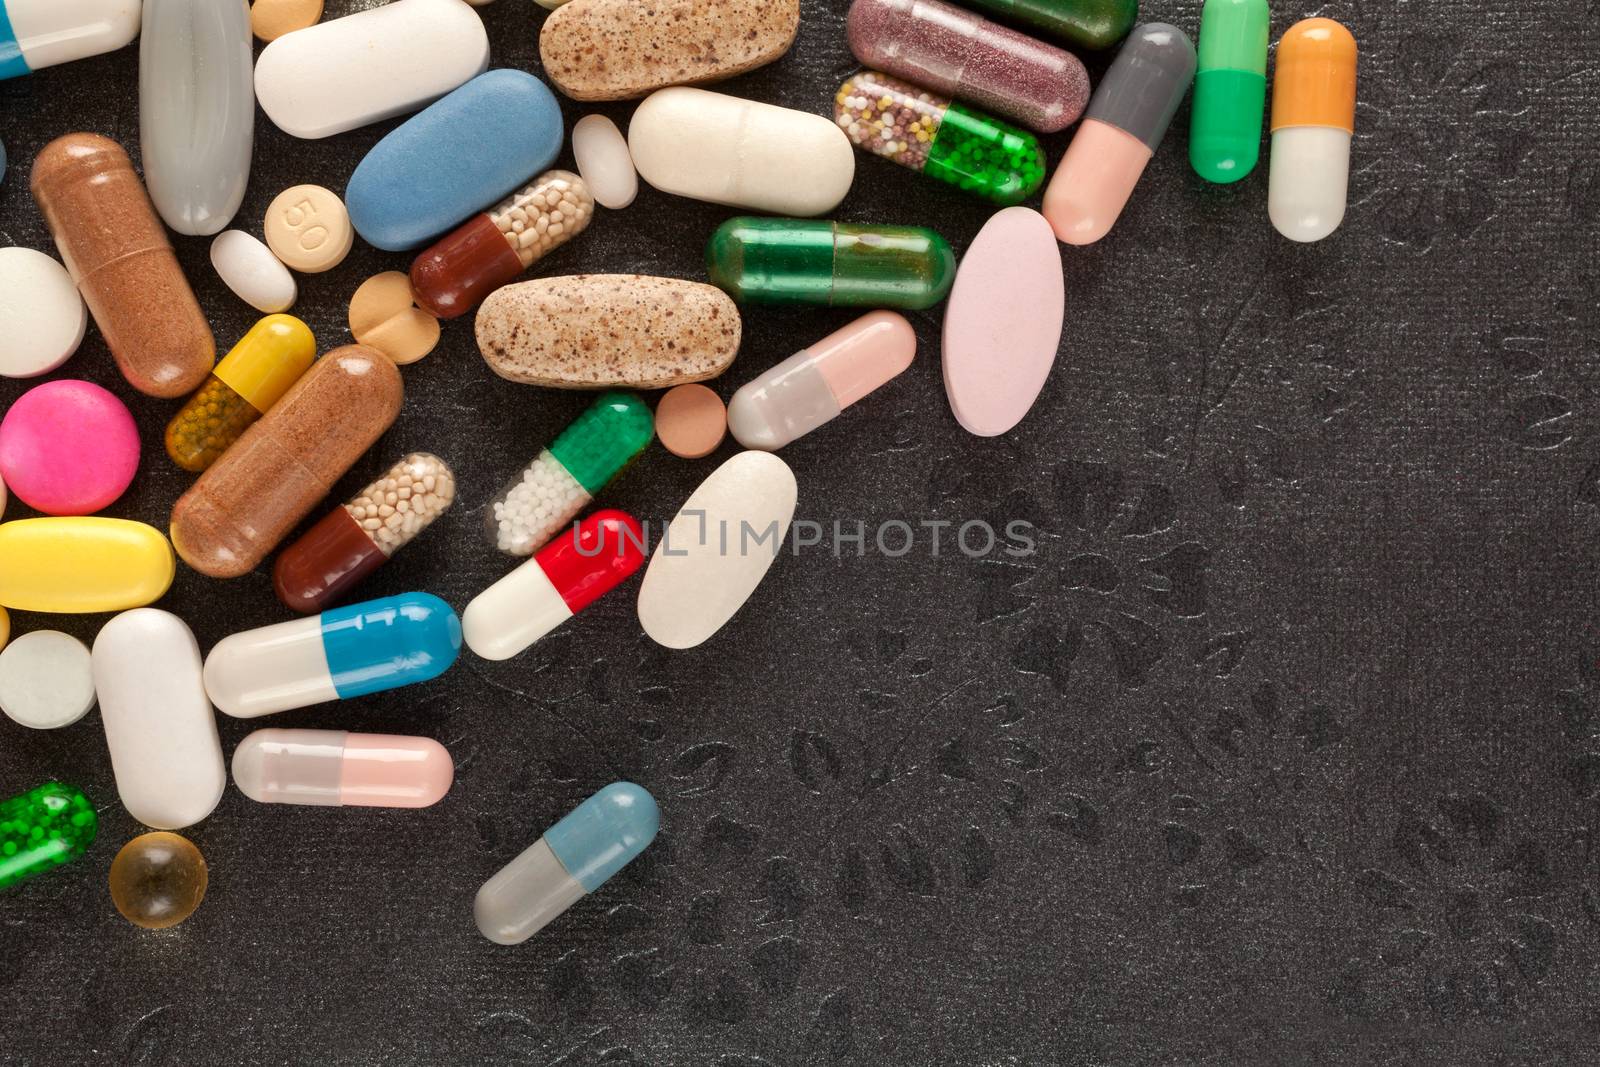 Colorful pills over dark background